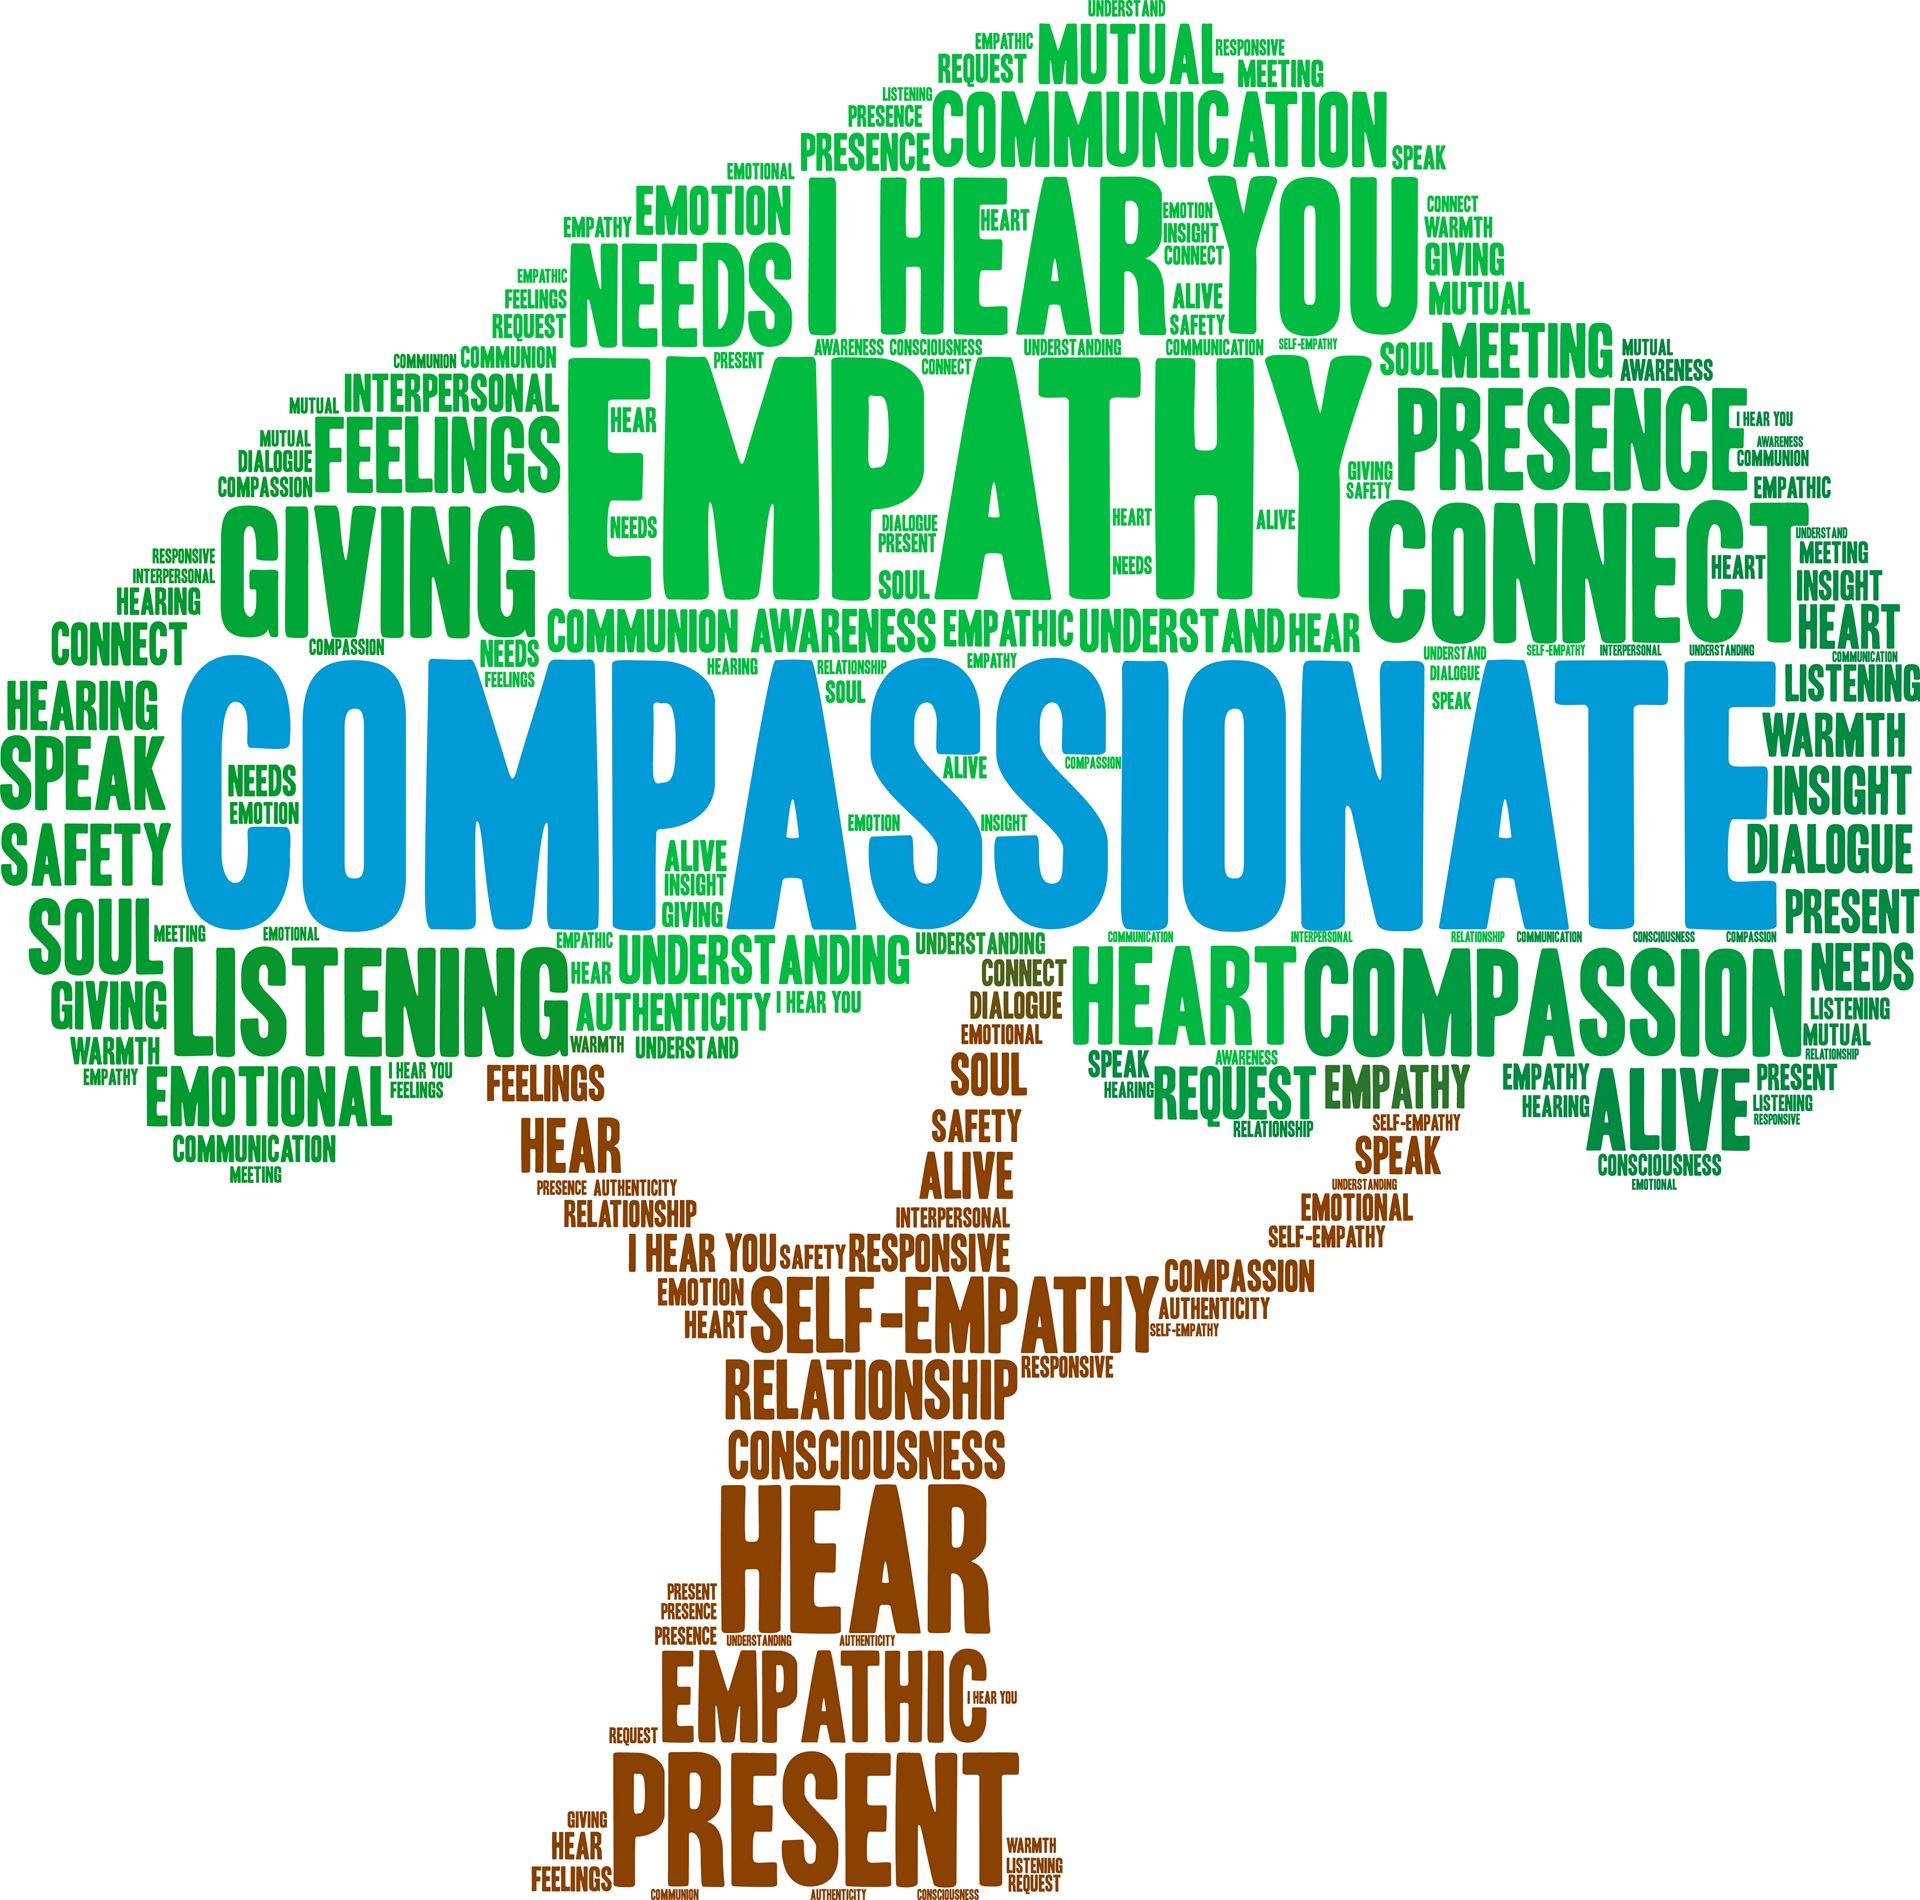 Personal Acts of Compassion